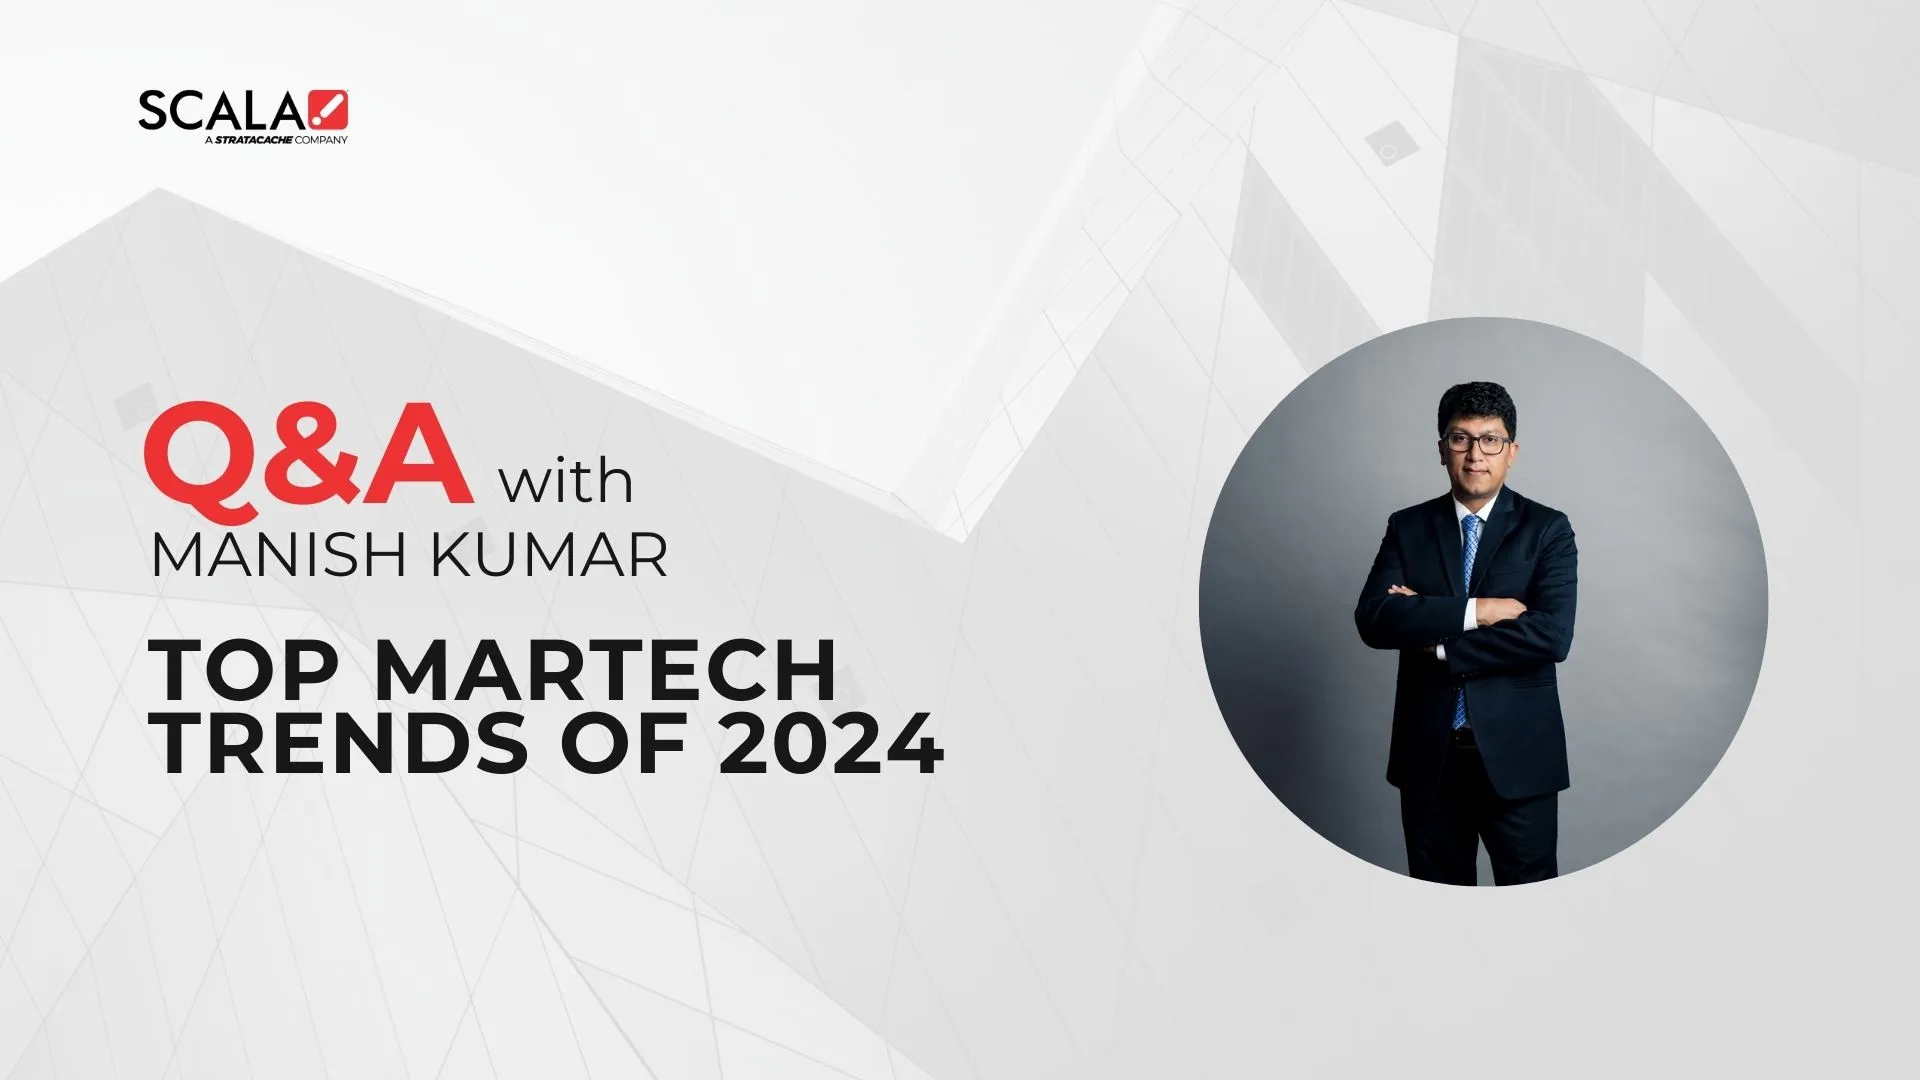 Manish Kumar's Q&A session on Martech trends shaping 2024 in Asia-Pacific